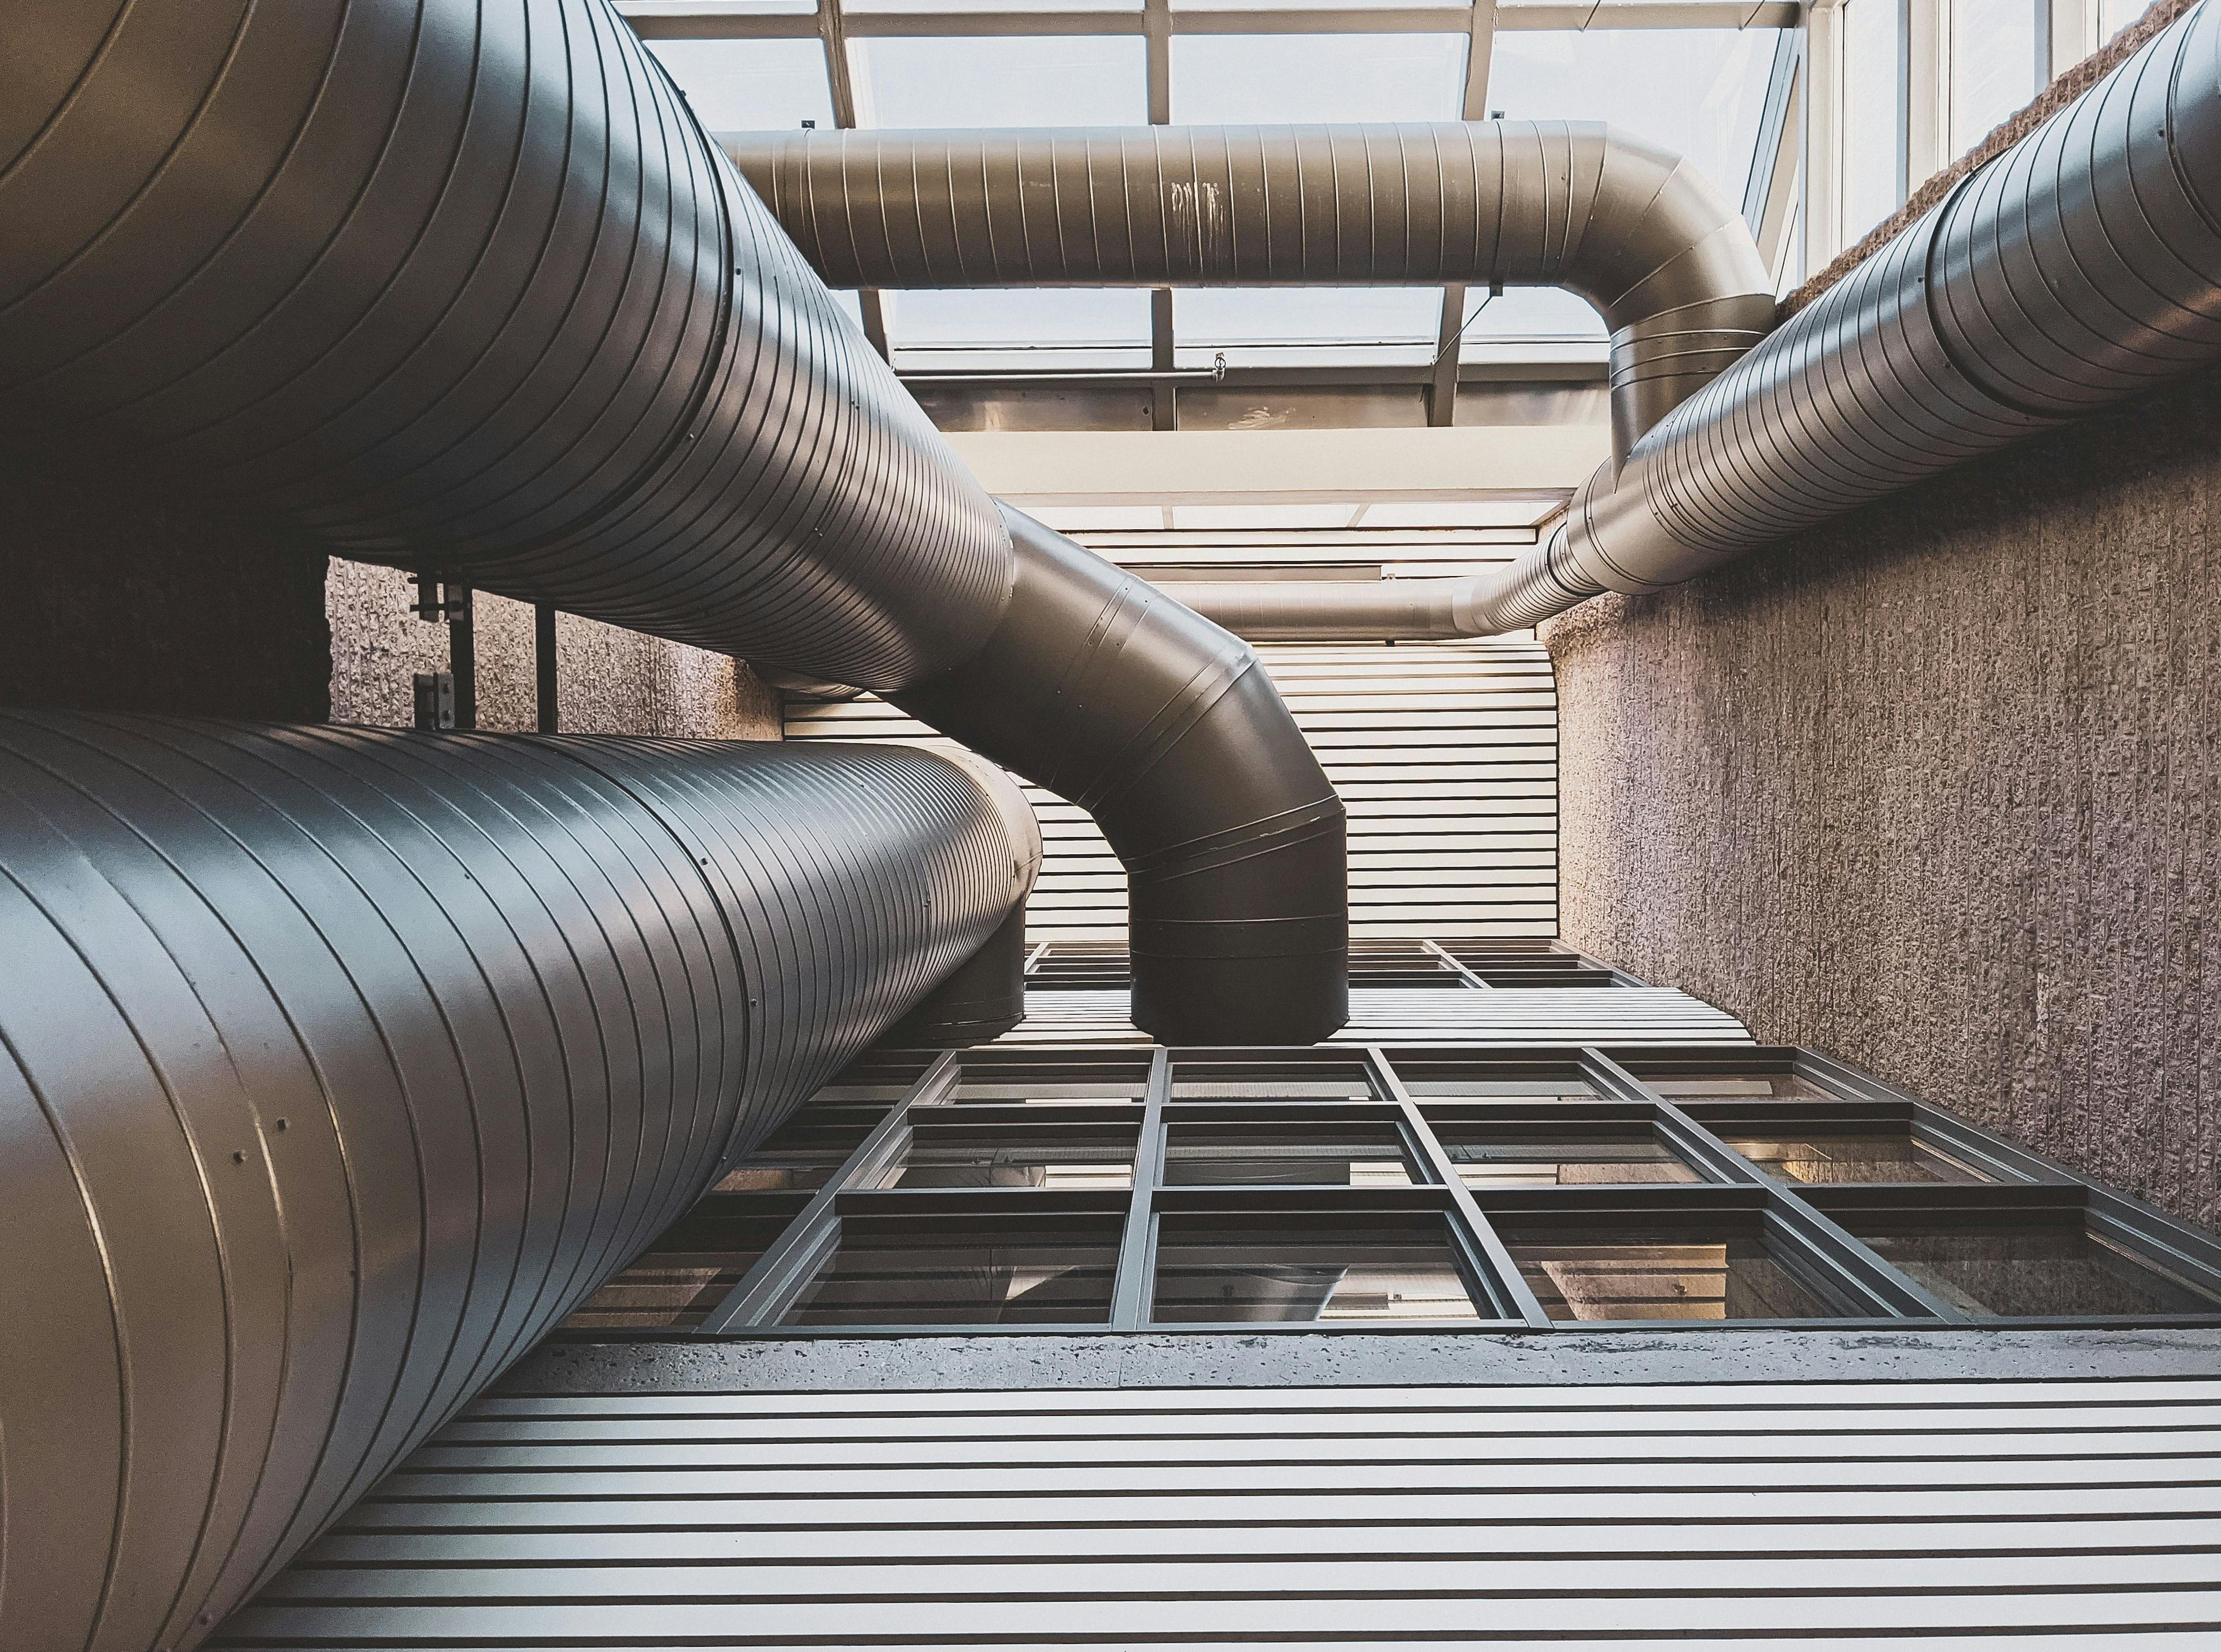 image of pipes entering building